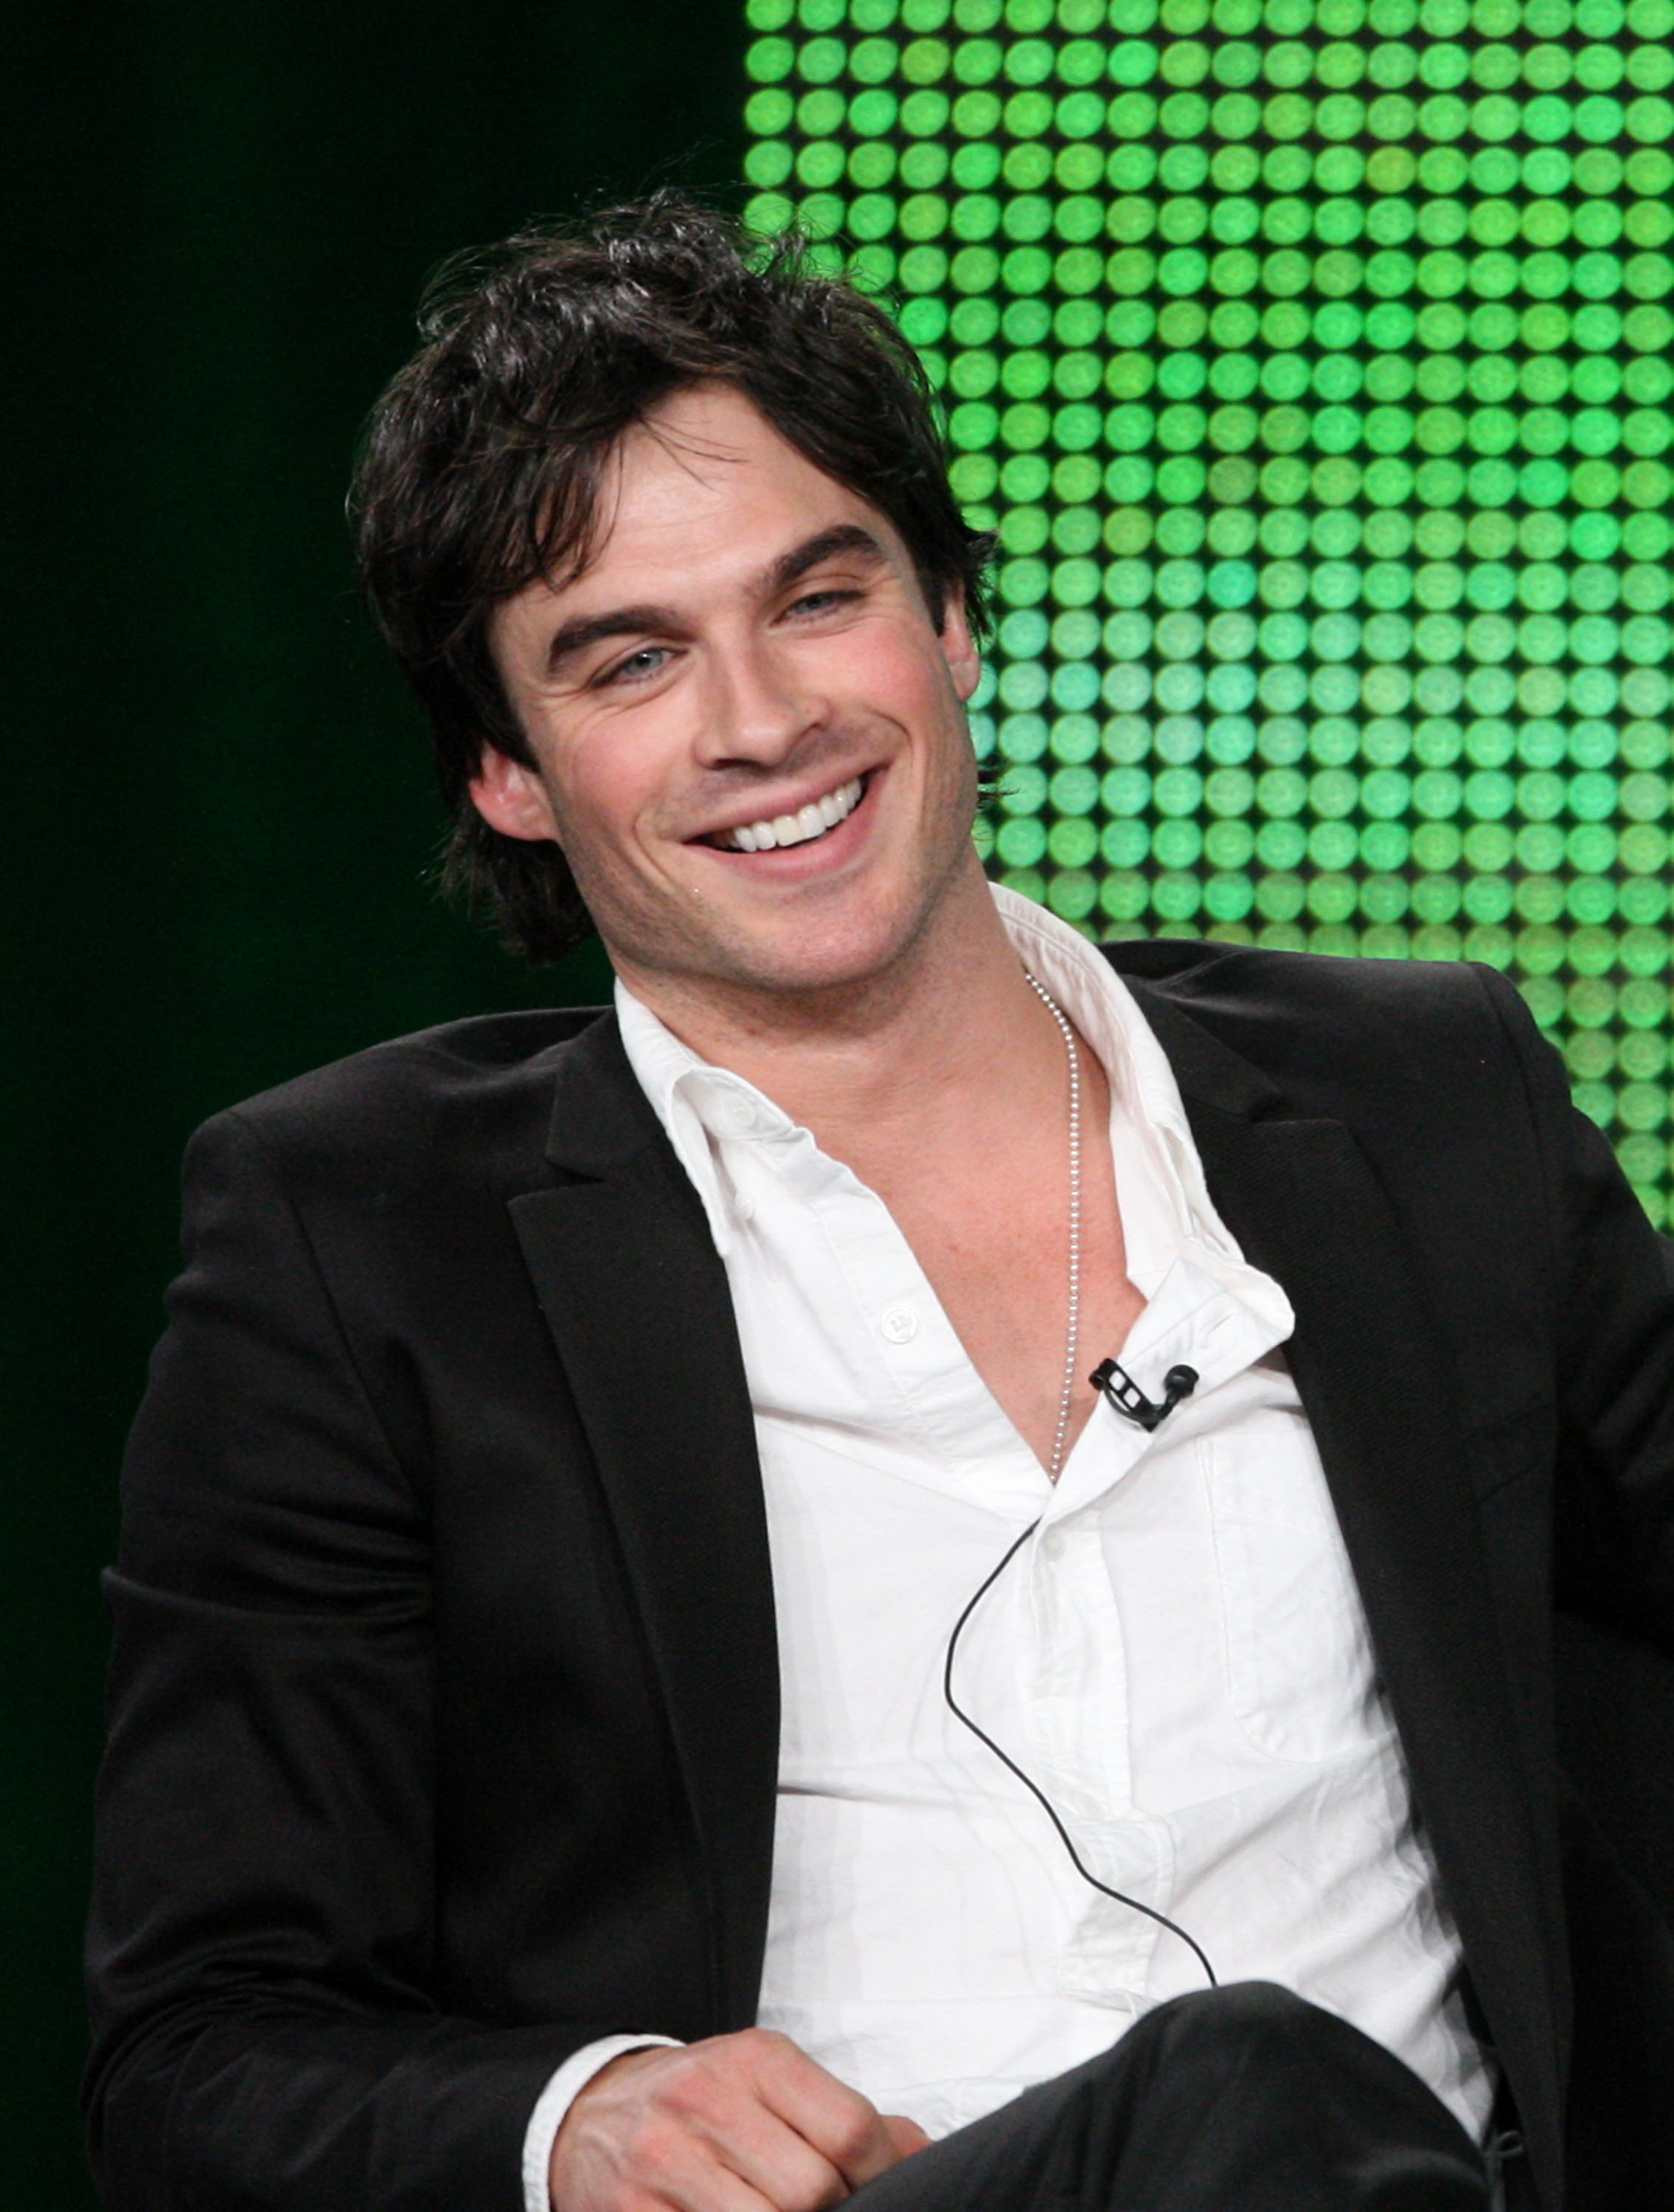 PASADENA, CA - JANUARY 09: Actor Ian Somerhalder speaks onstage at the CW "The Vampire Diaries" Q&A portion of the 2010 Winter TCA Tour day 1 at the Langham Hotel on January 9, 2010 in Pasadena, California. (Photo by Frederick M. Brown/Getty Images)